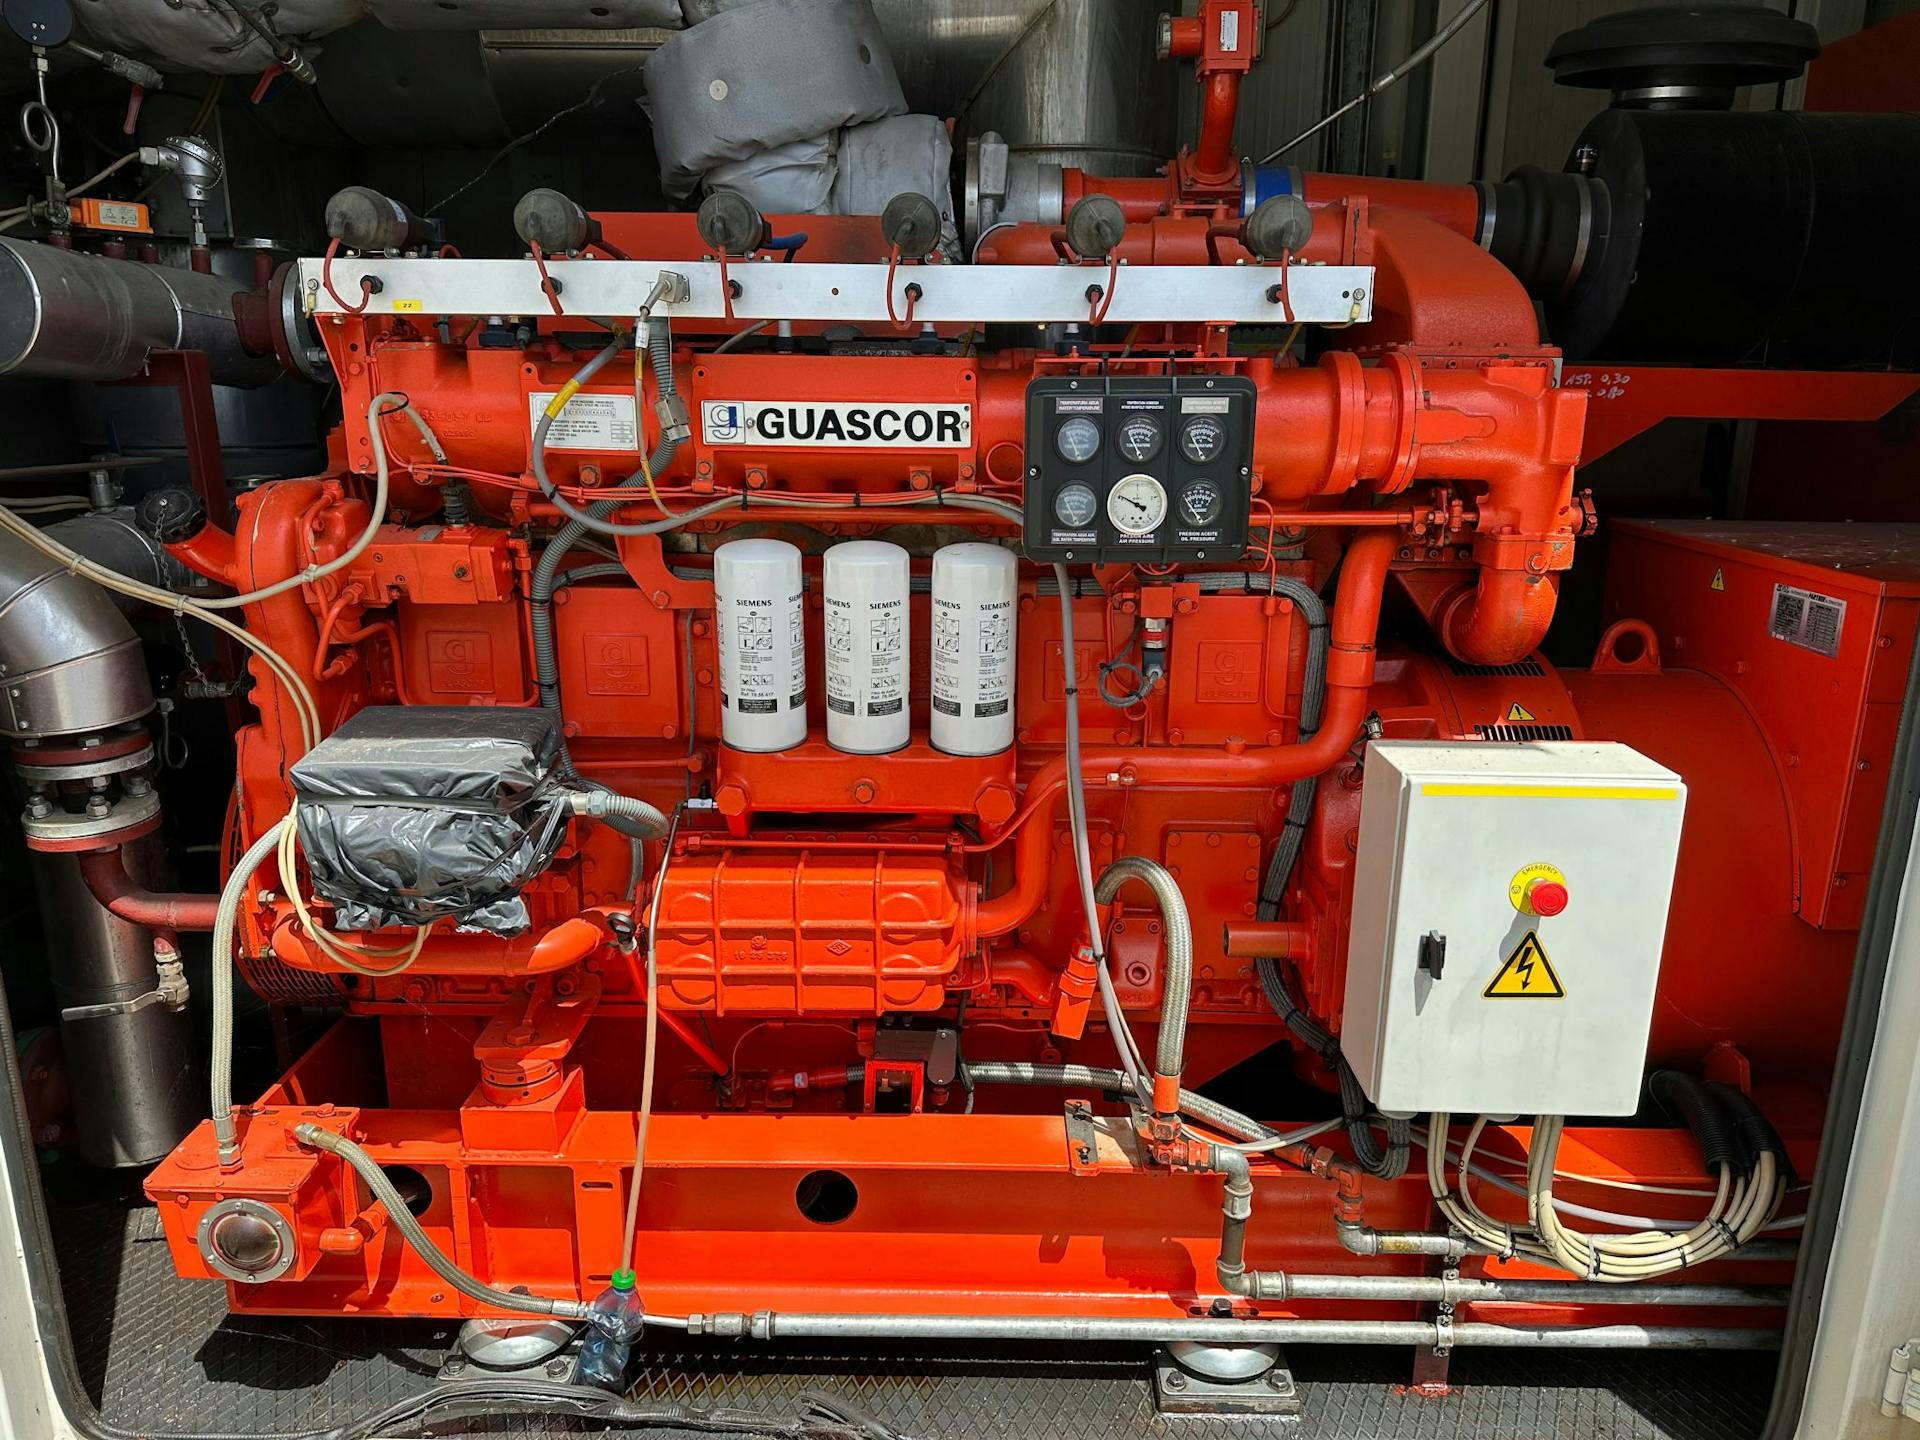 nullPhoto of Guascor FGLD180 Natural Gas Generator Set with gas engine and plate heat exchanger - gas generator for sale uk used